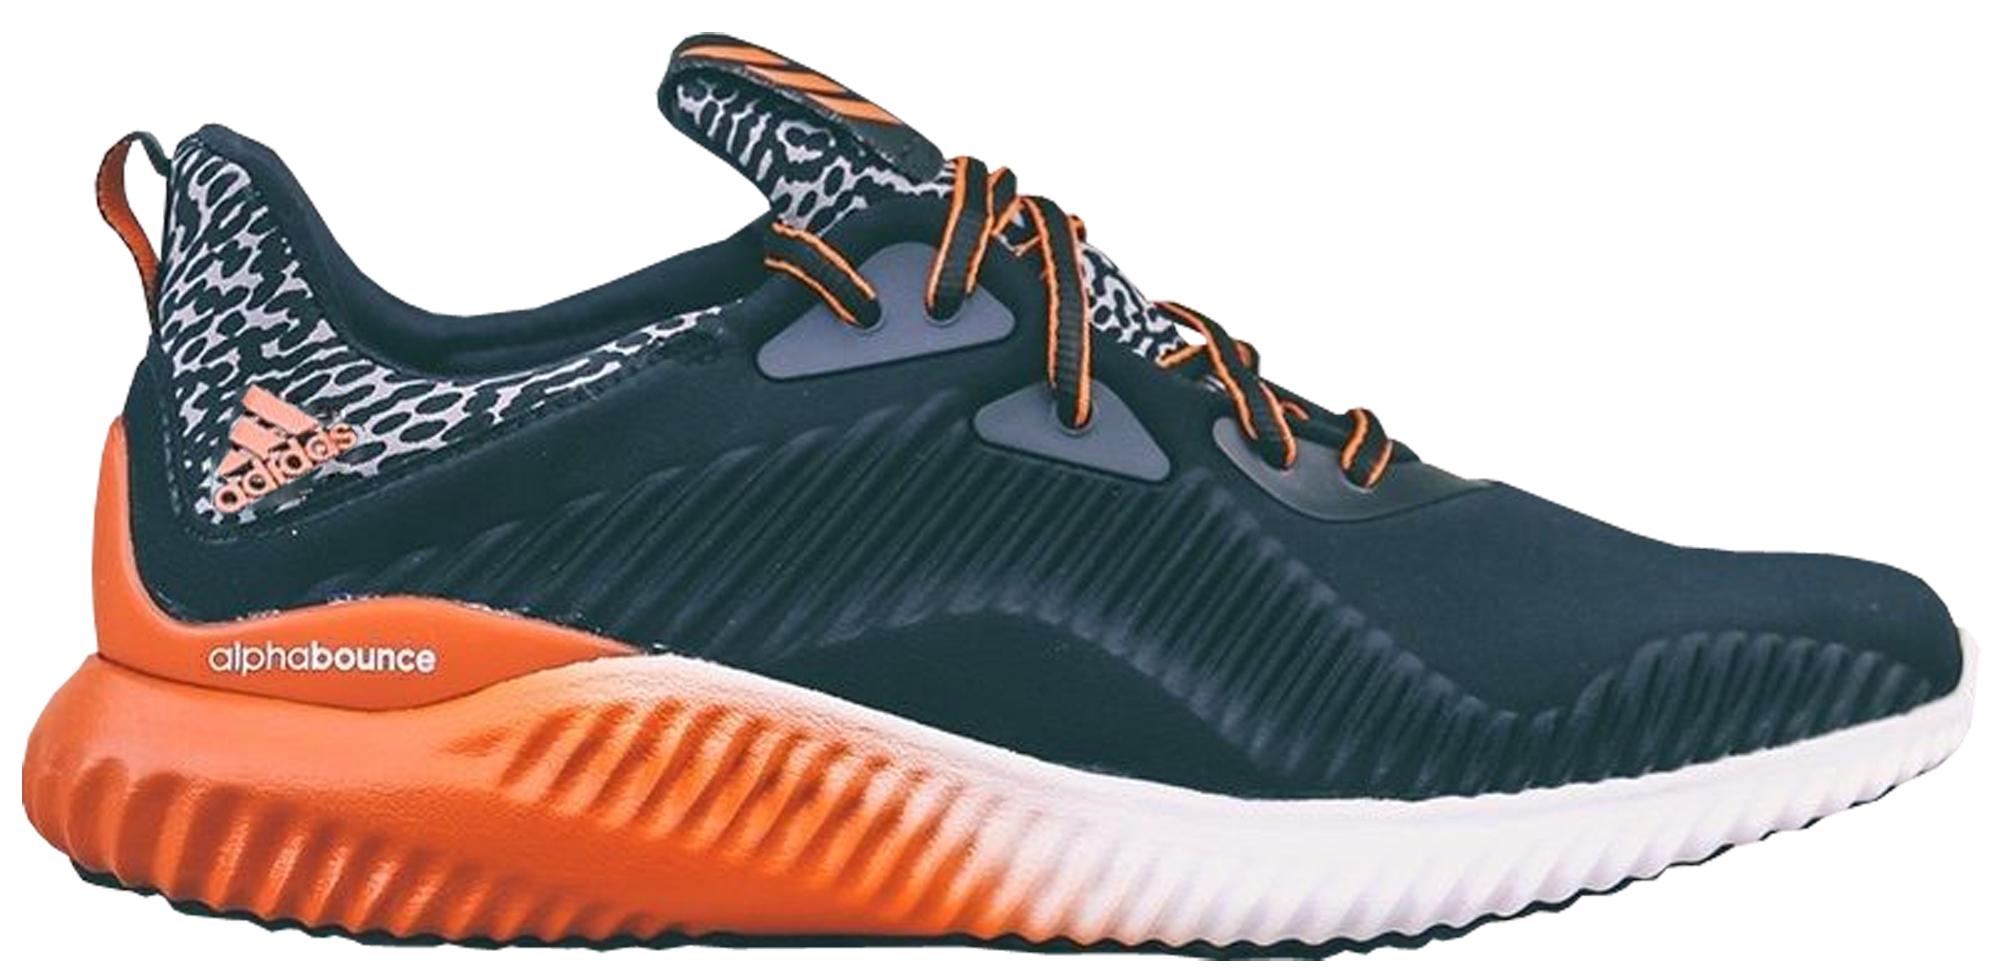 Adidas AlphaBounce Miami Hurricanes PE College Bowl Pack 2016